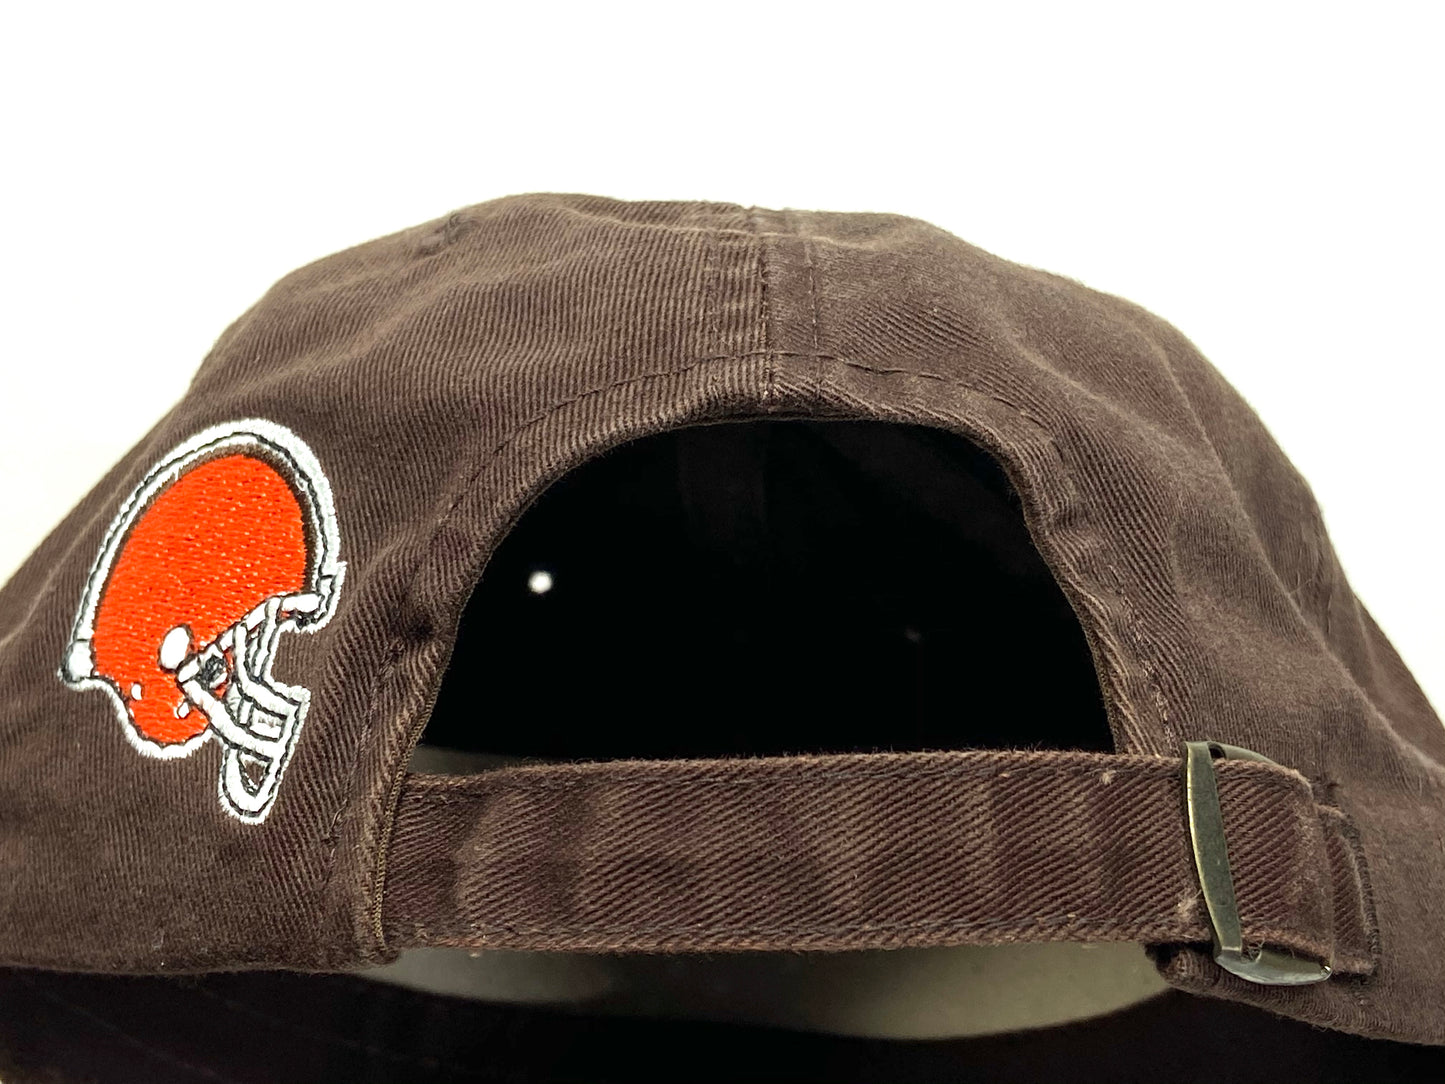 Cleveland Browns Vintage NFL "Tattered" Brown Cap By American Needle